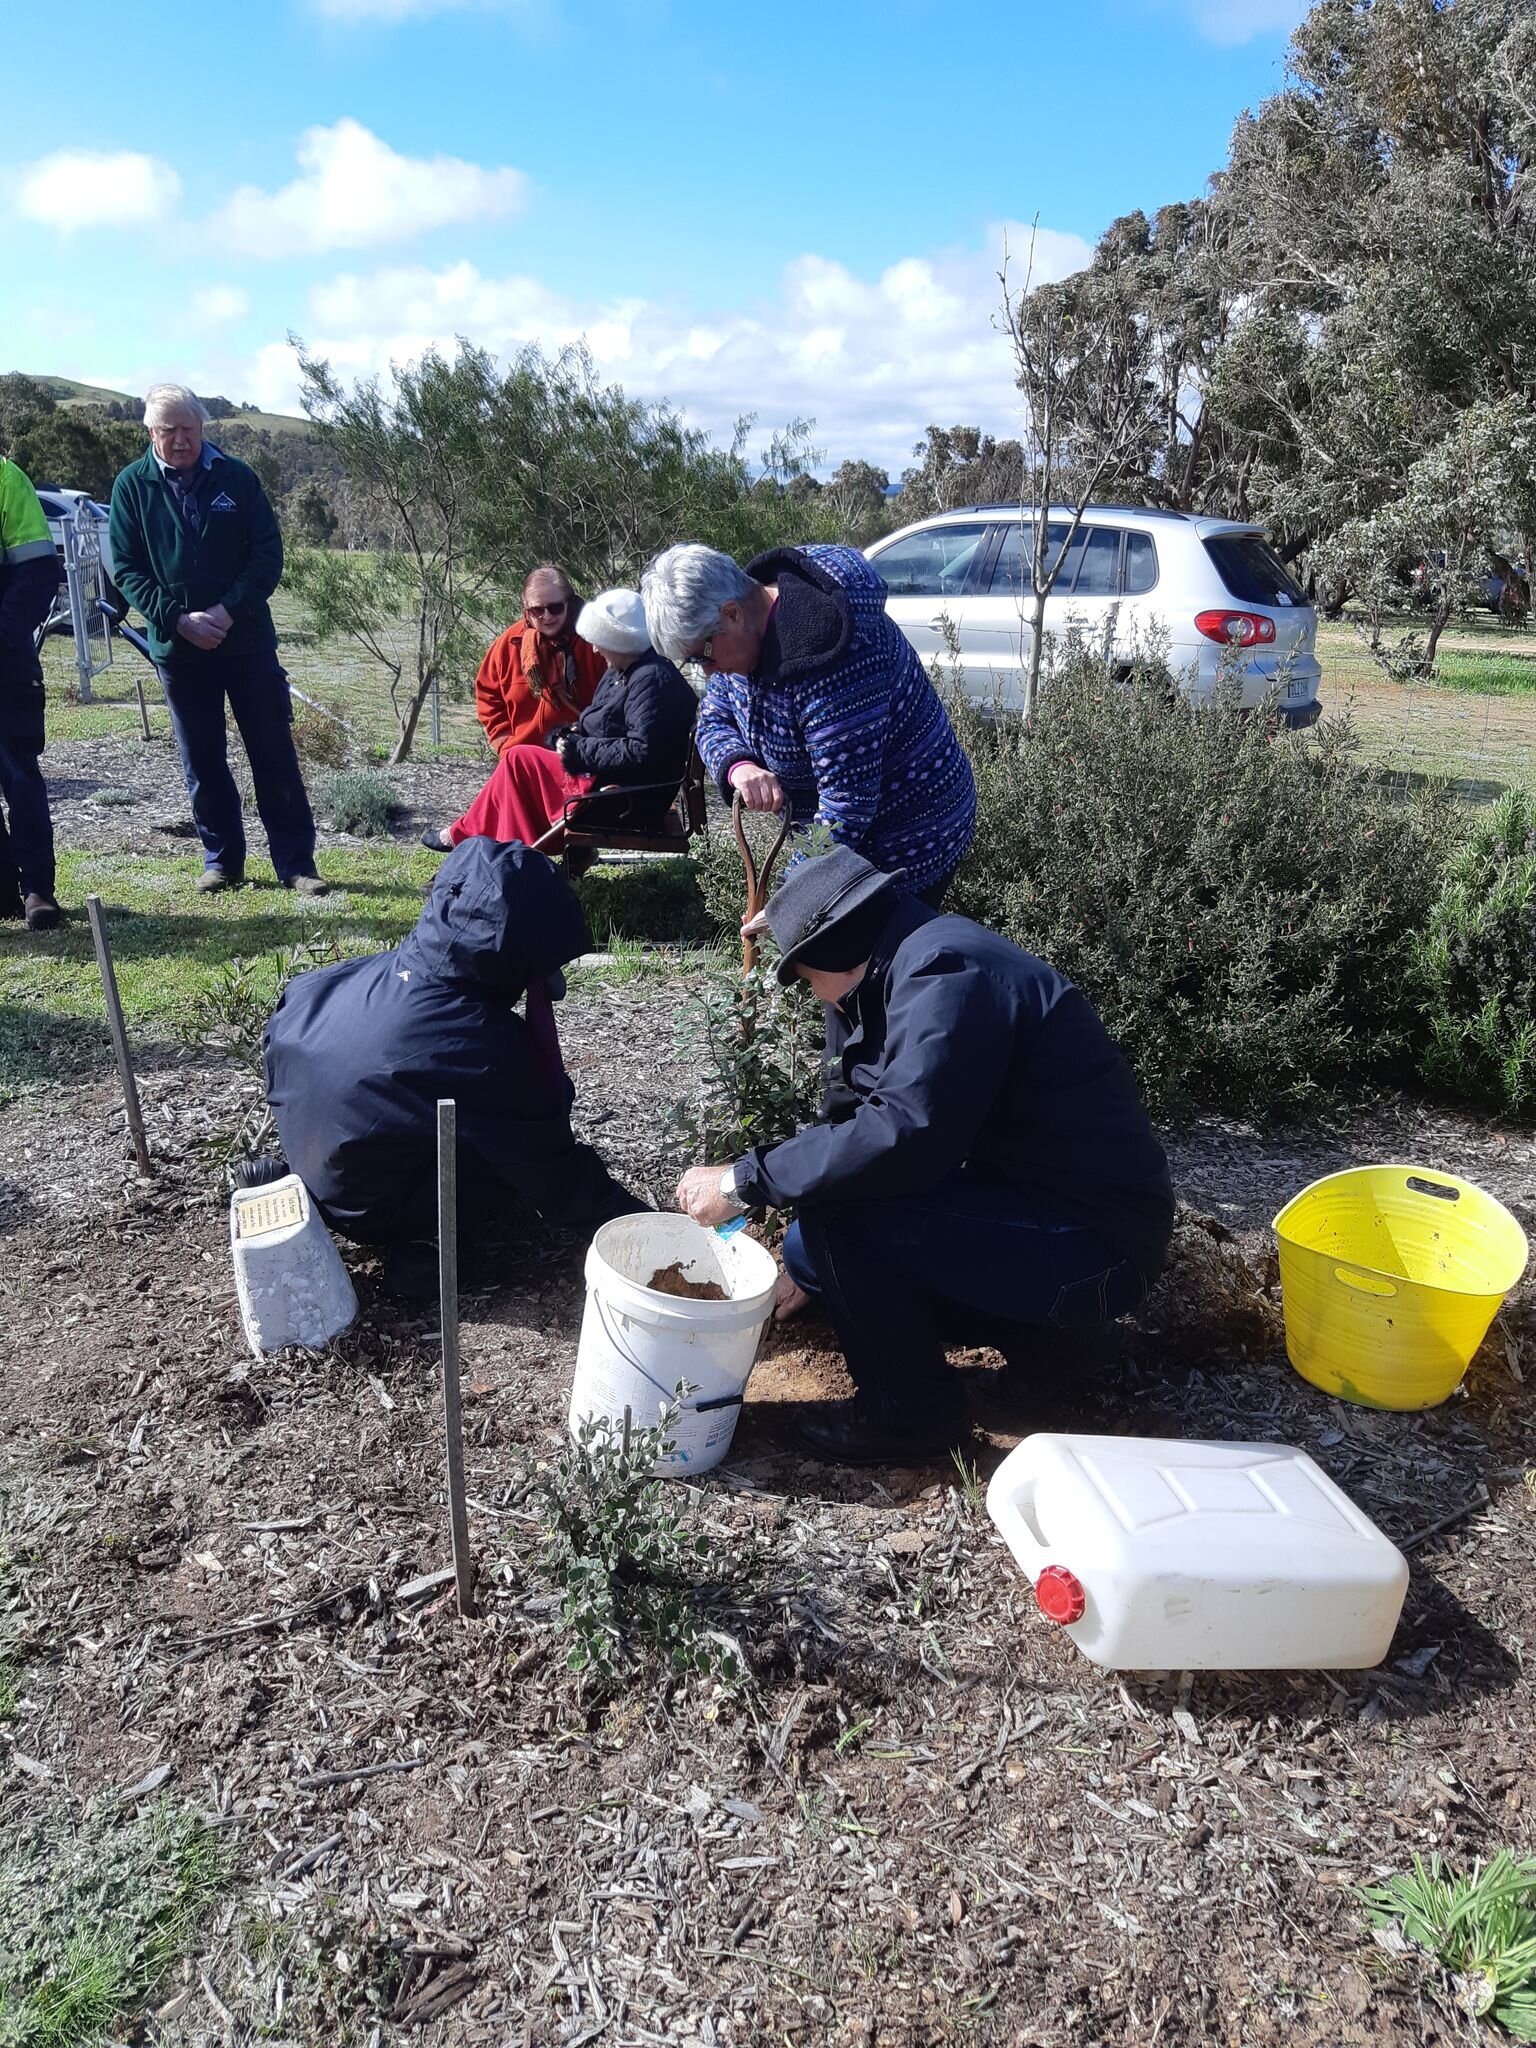  Remembering Keith, a founding Tarago Landcare member, with a memorial tree planting.  